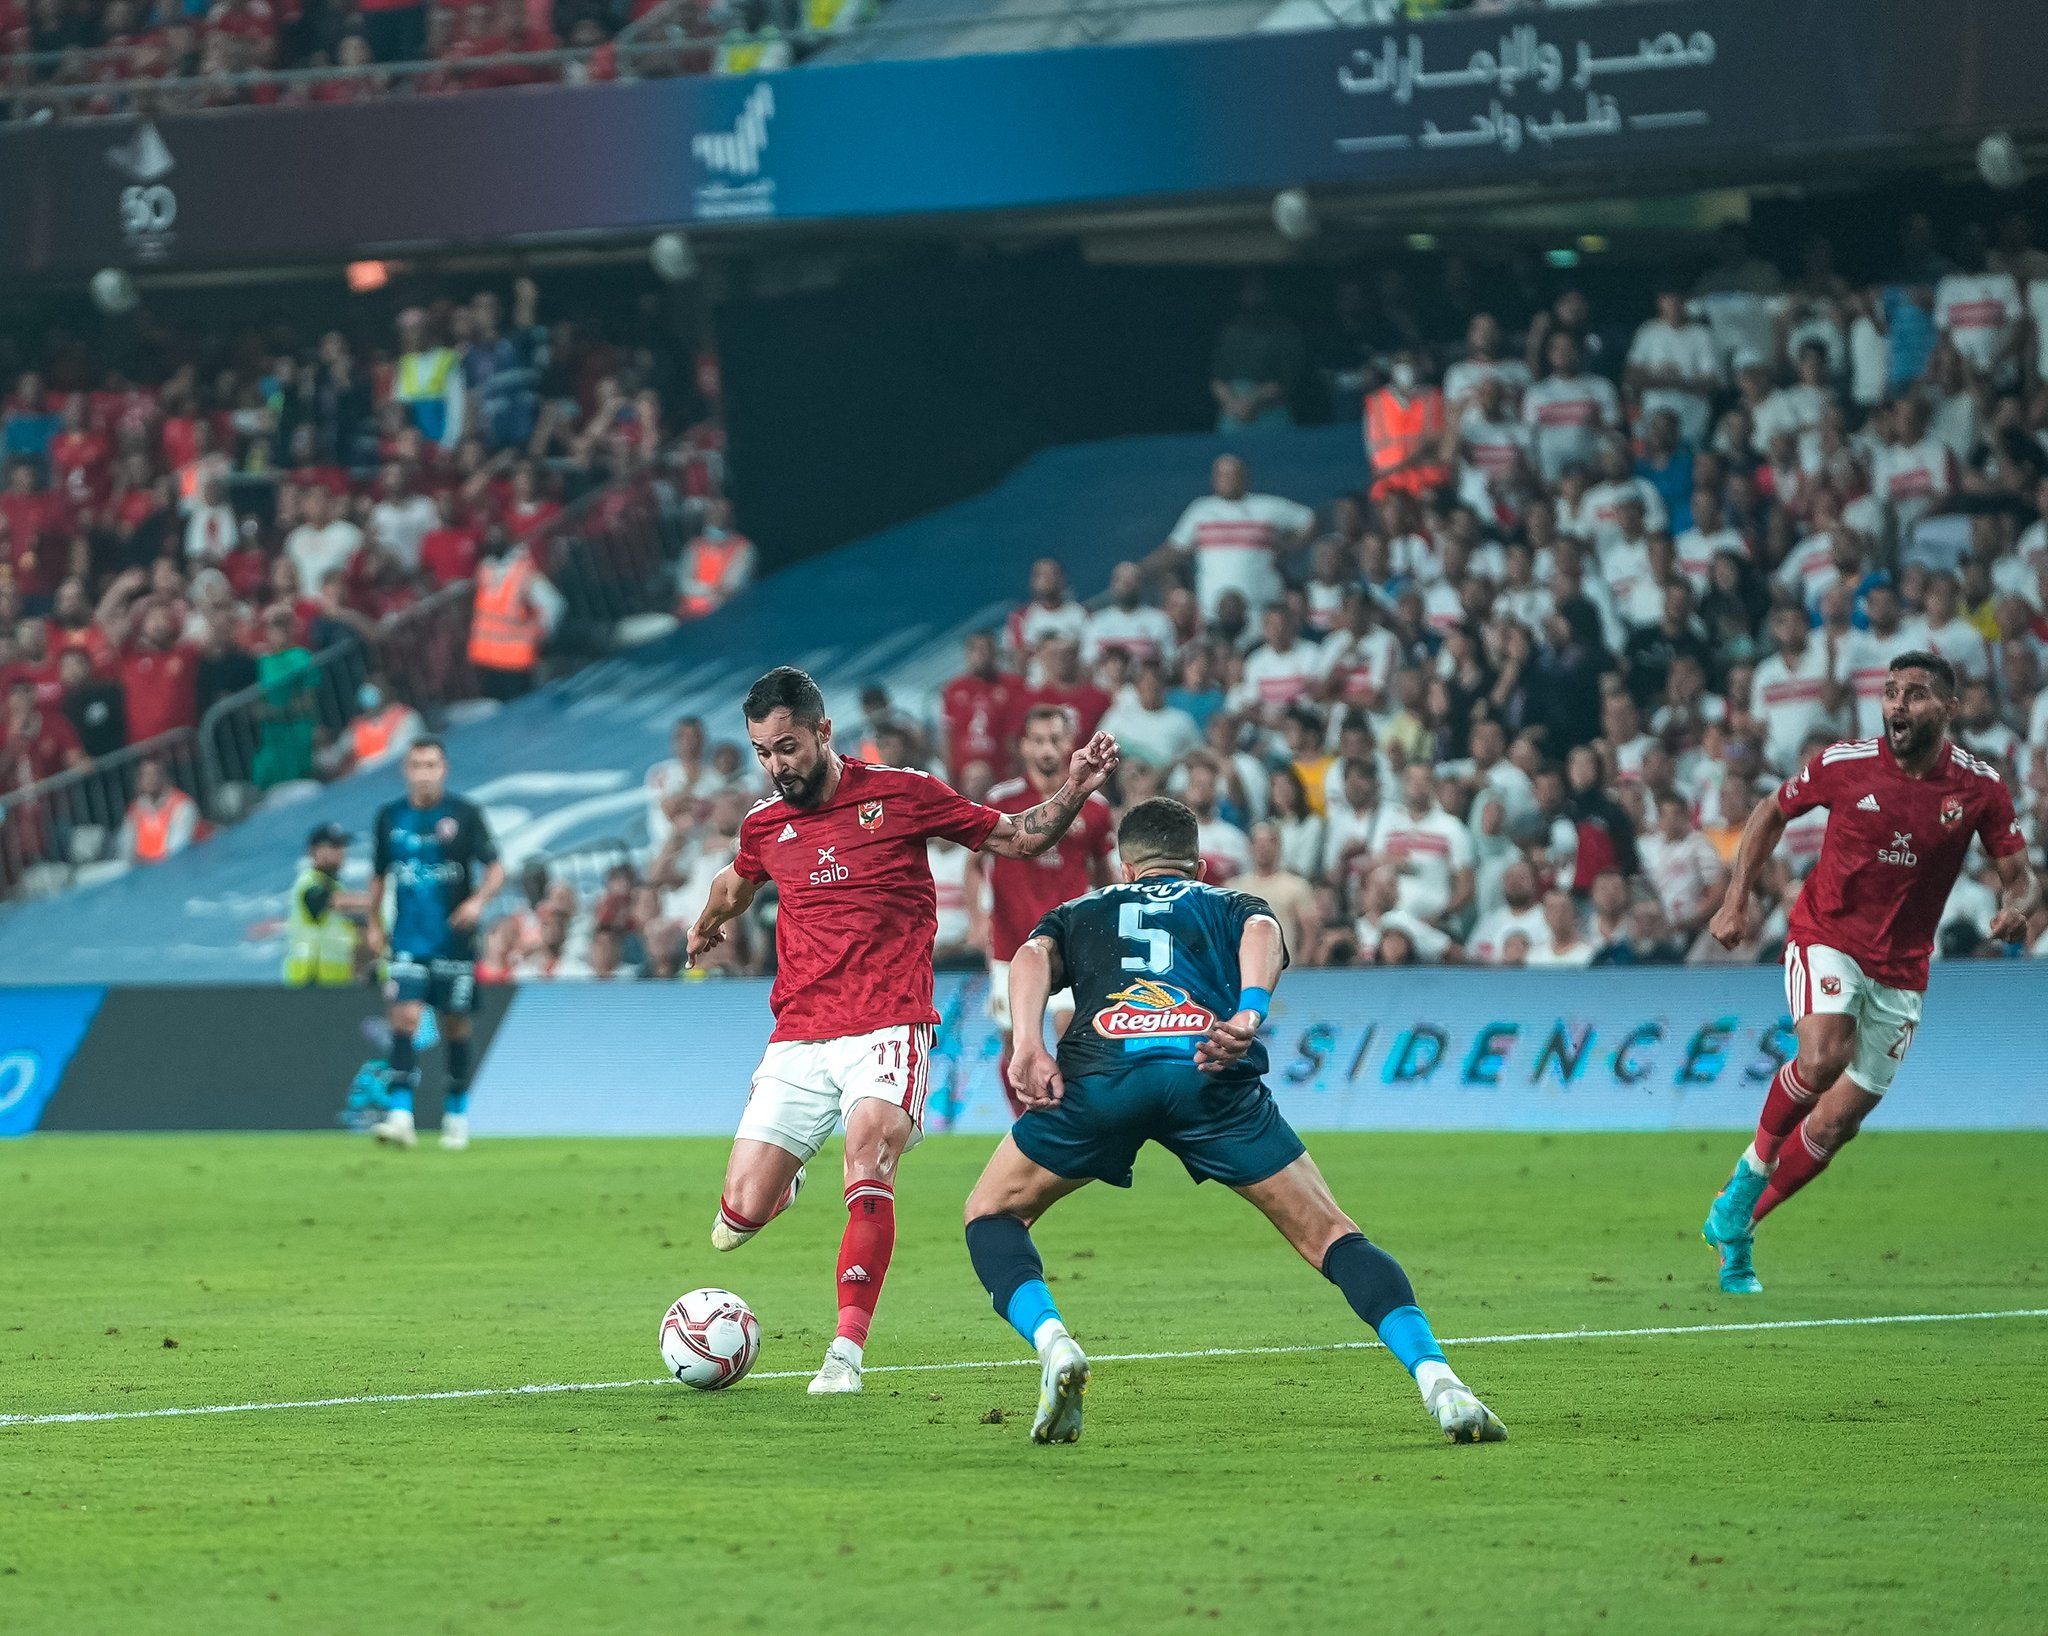 El Dakhleya vs Al Ahly: Prediction, Odds, Betting Tips, and How to Watch | 02/11/2022